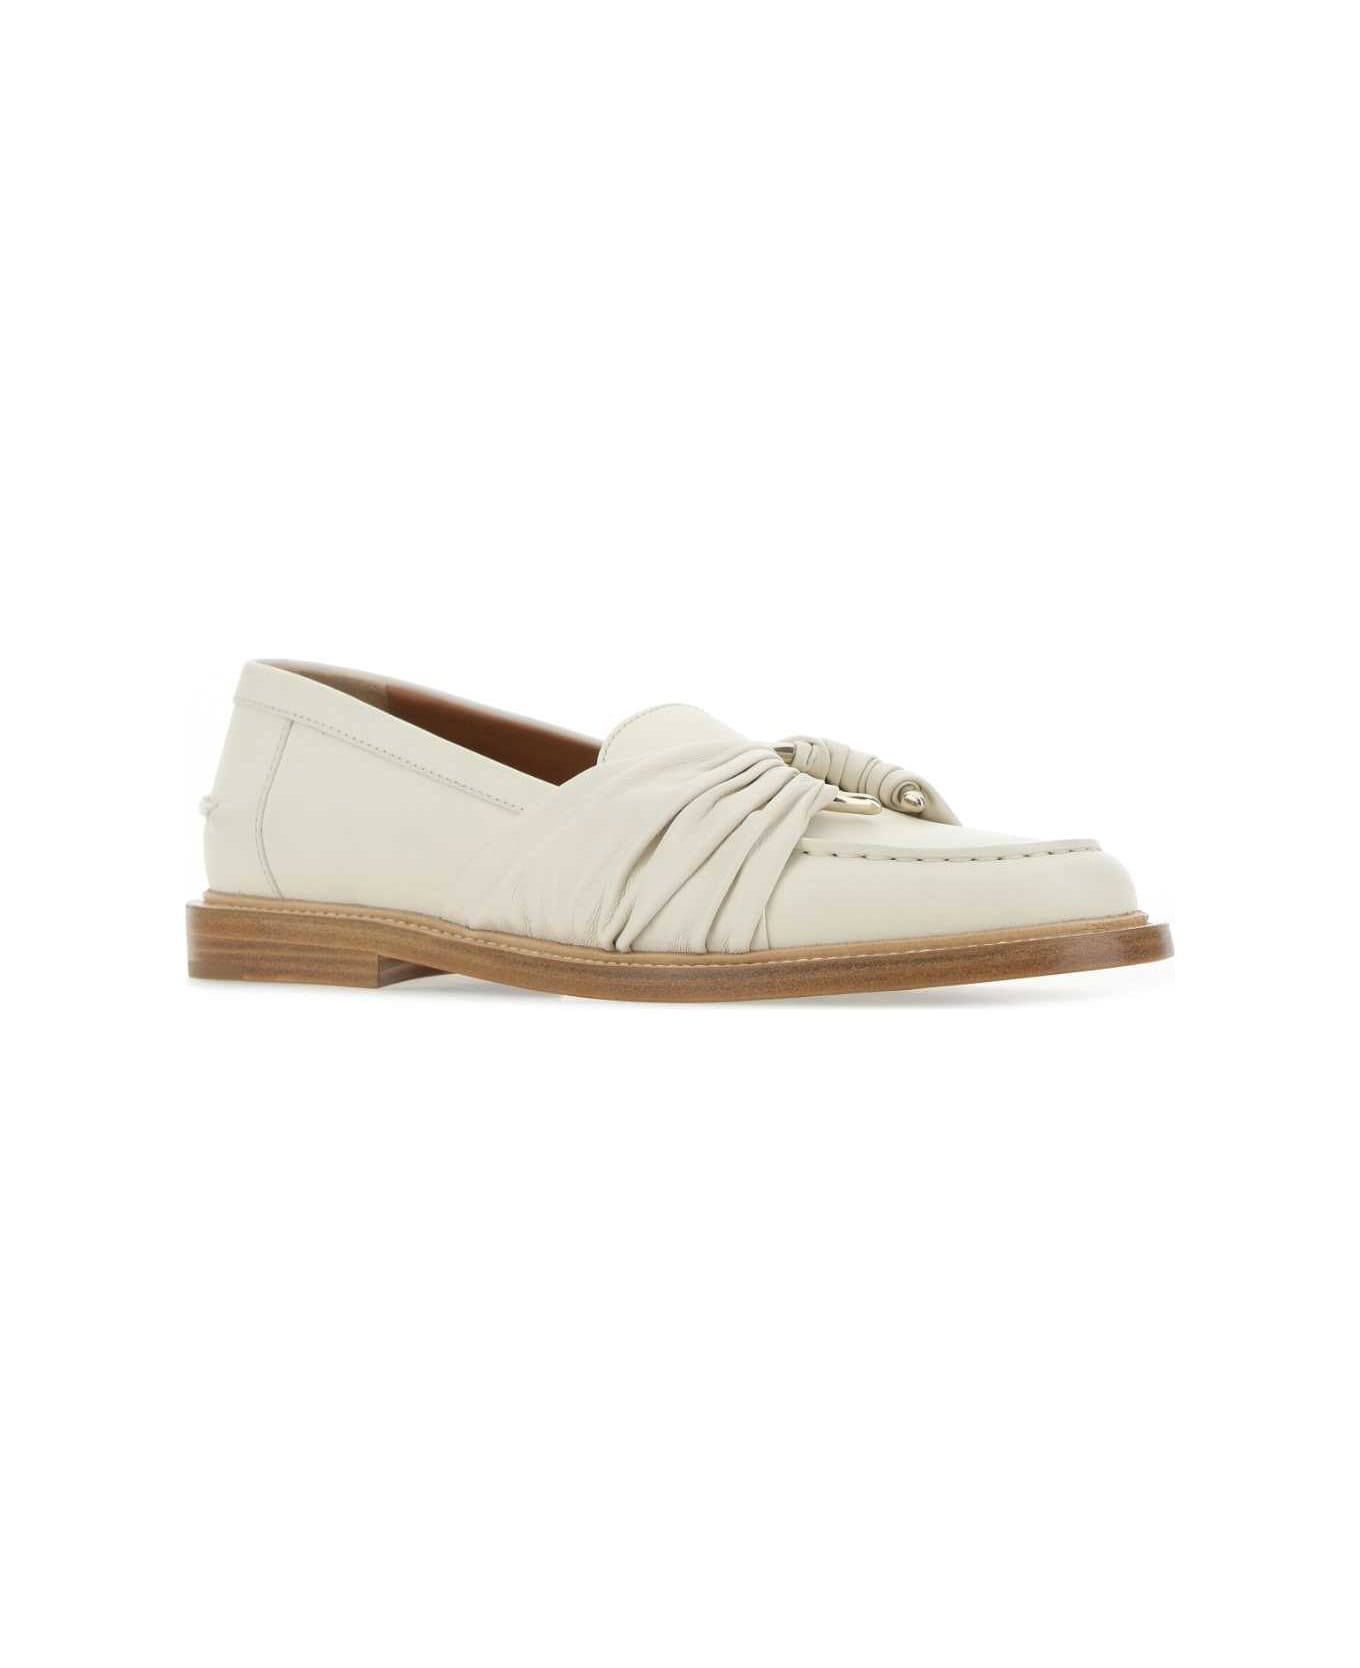 Chloé Ivory Leather Loafers - 122 フラットシューズ